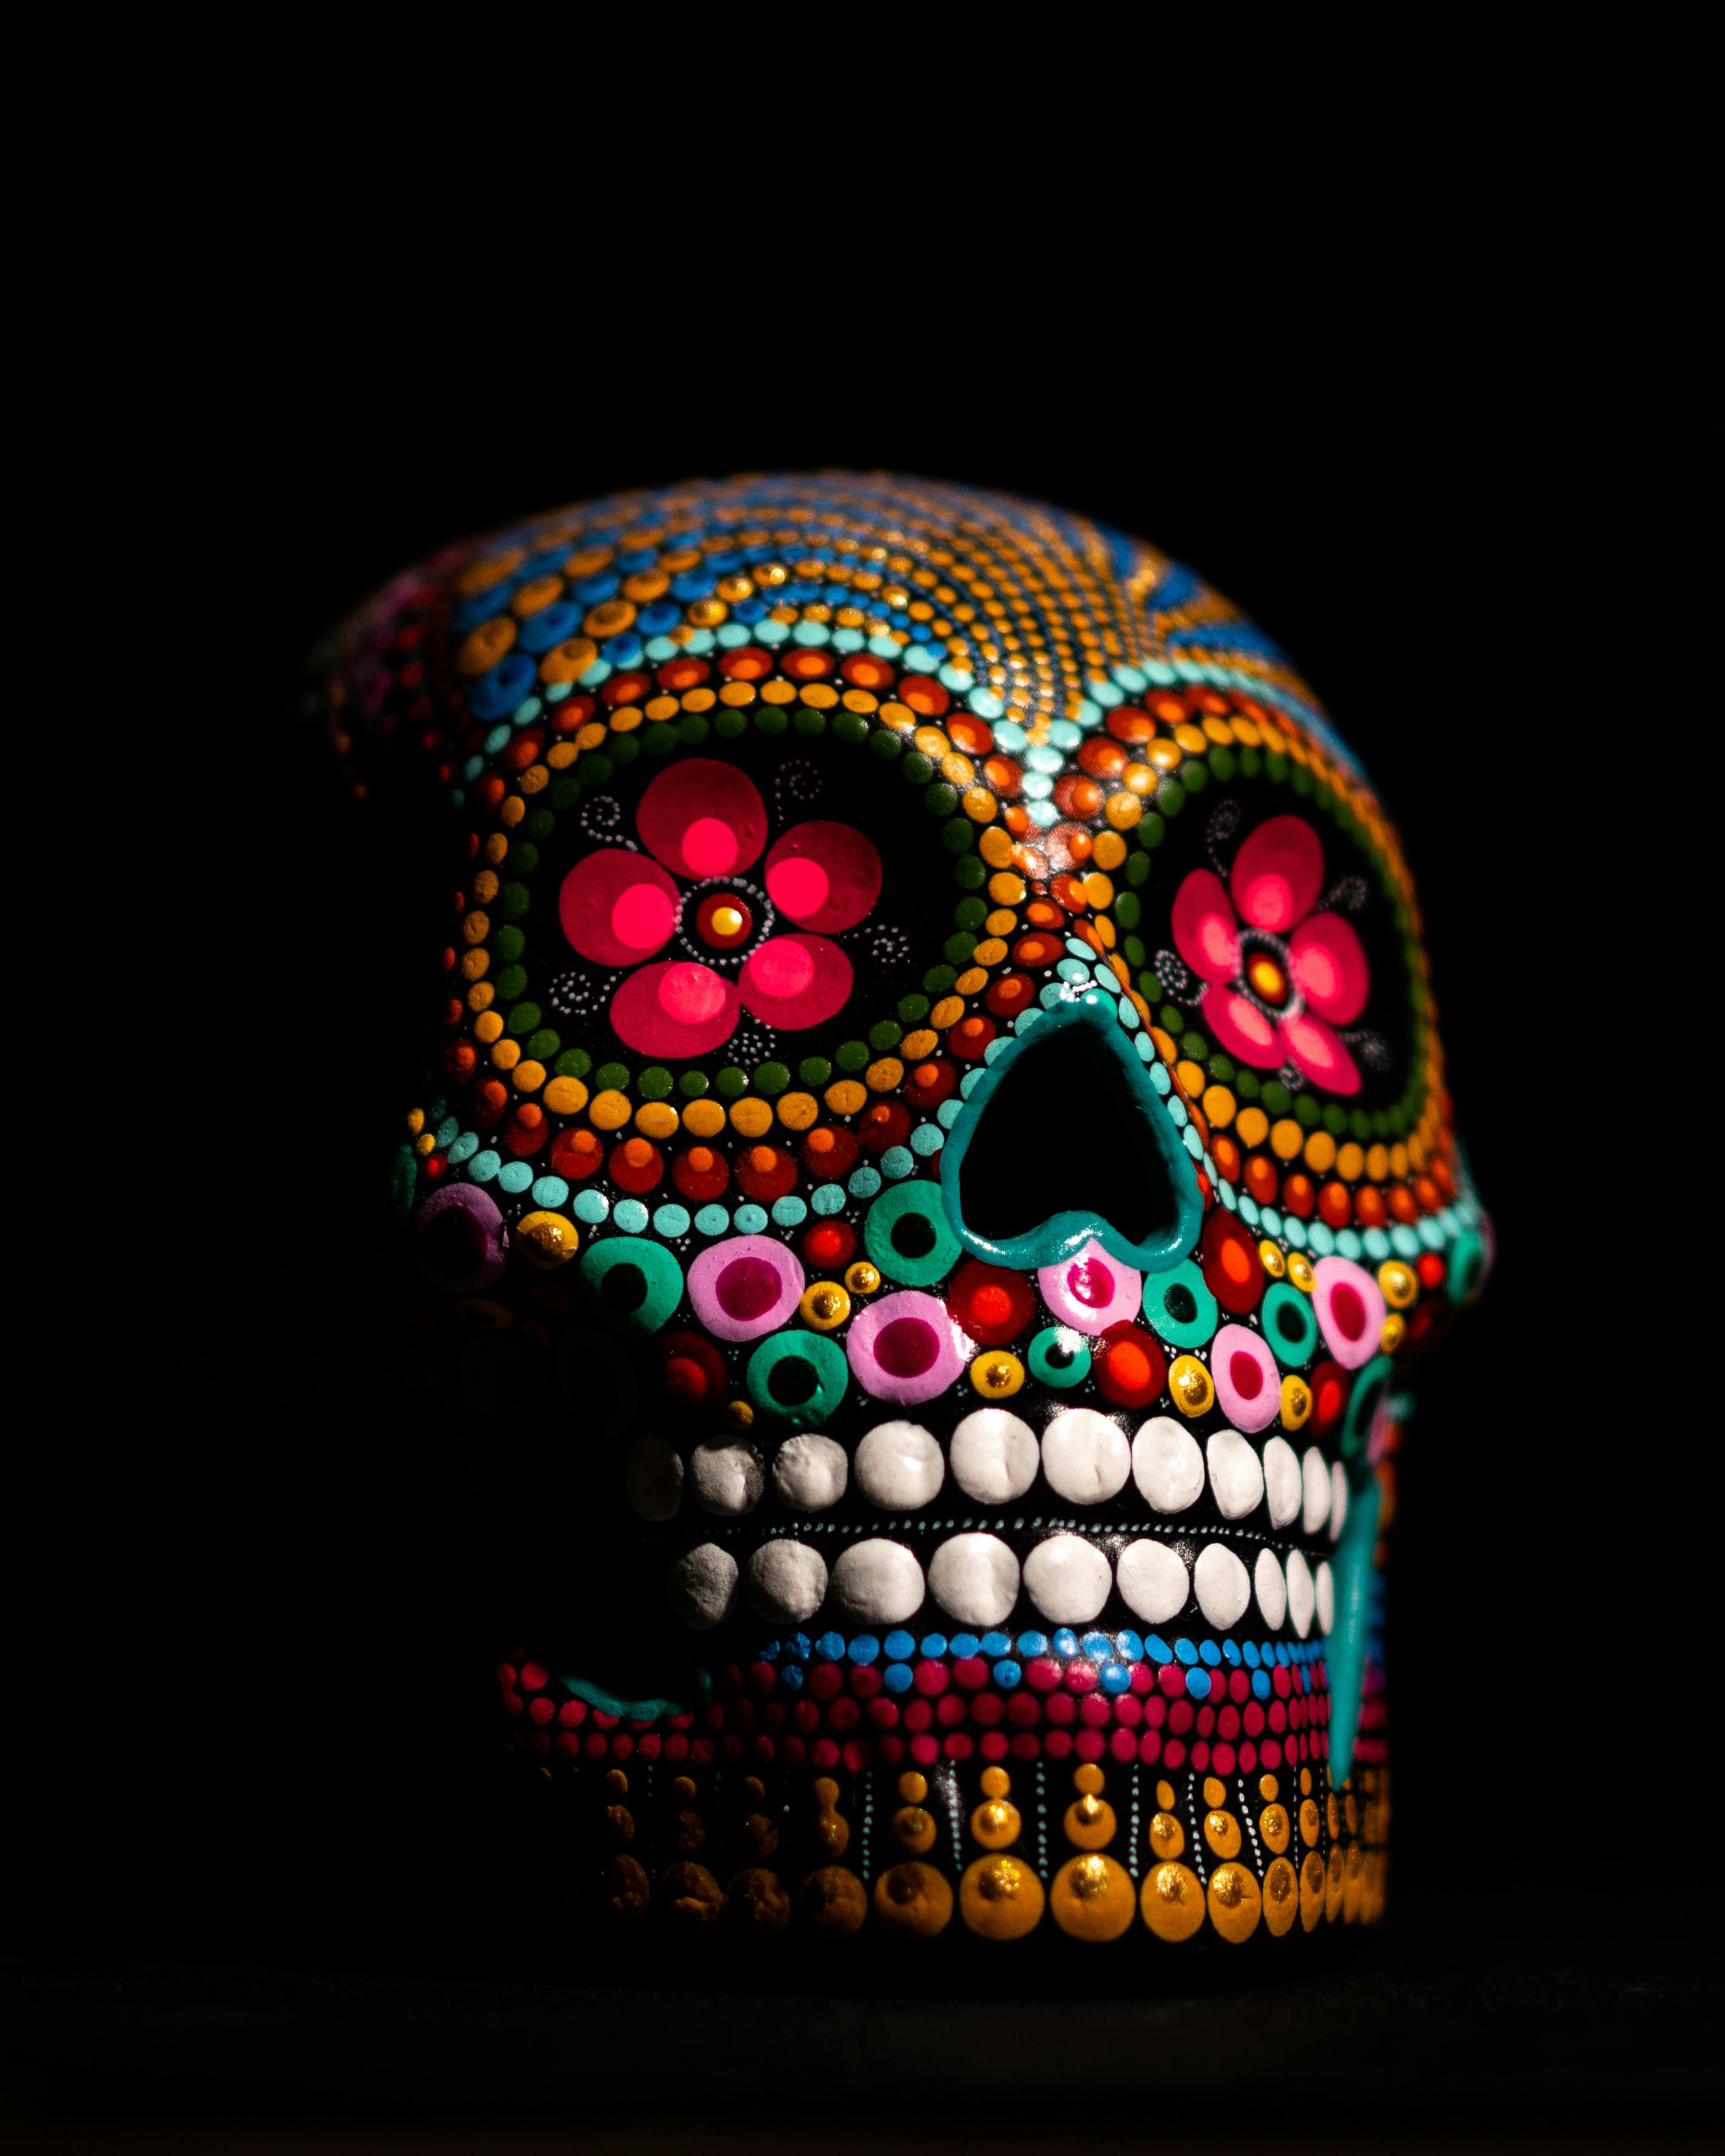 Iphone Wallpaper Skull Images  Free Photos PNG Stickers Wallpapers   Backgrounds  rawpixel